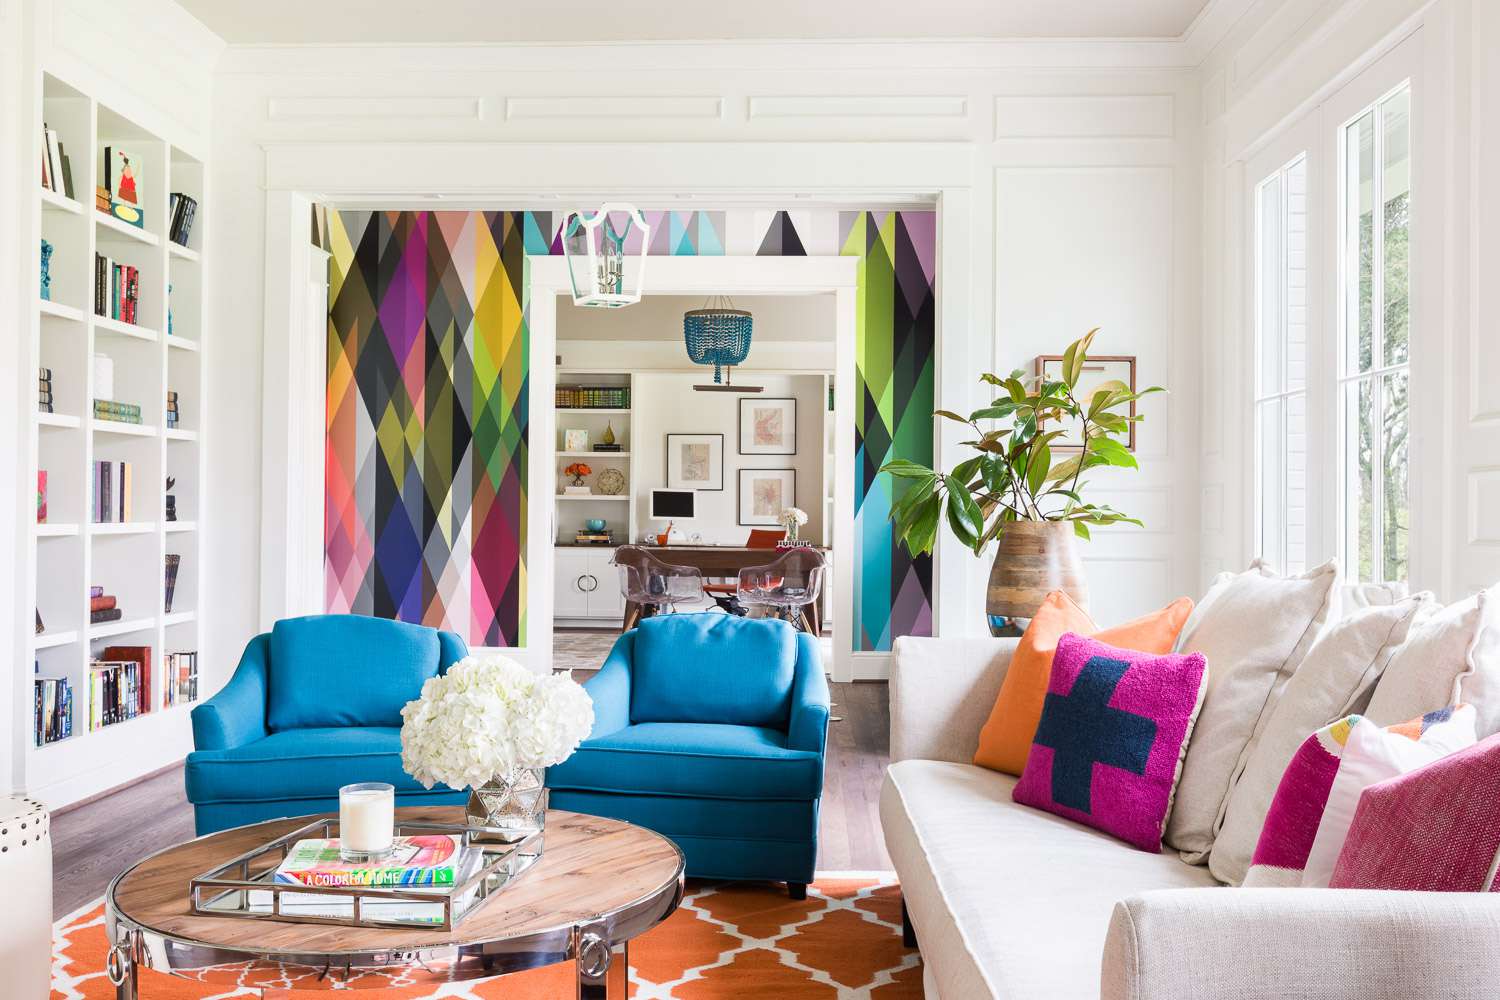 4 Hottest Living Room Colors - Check the Latest Trends for 2021